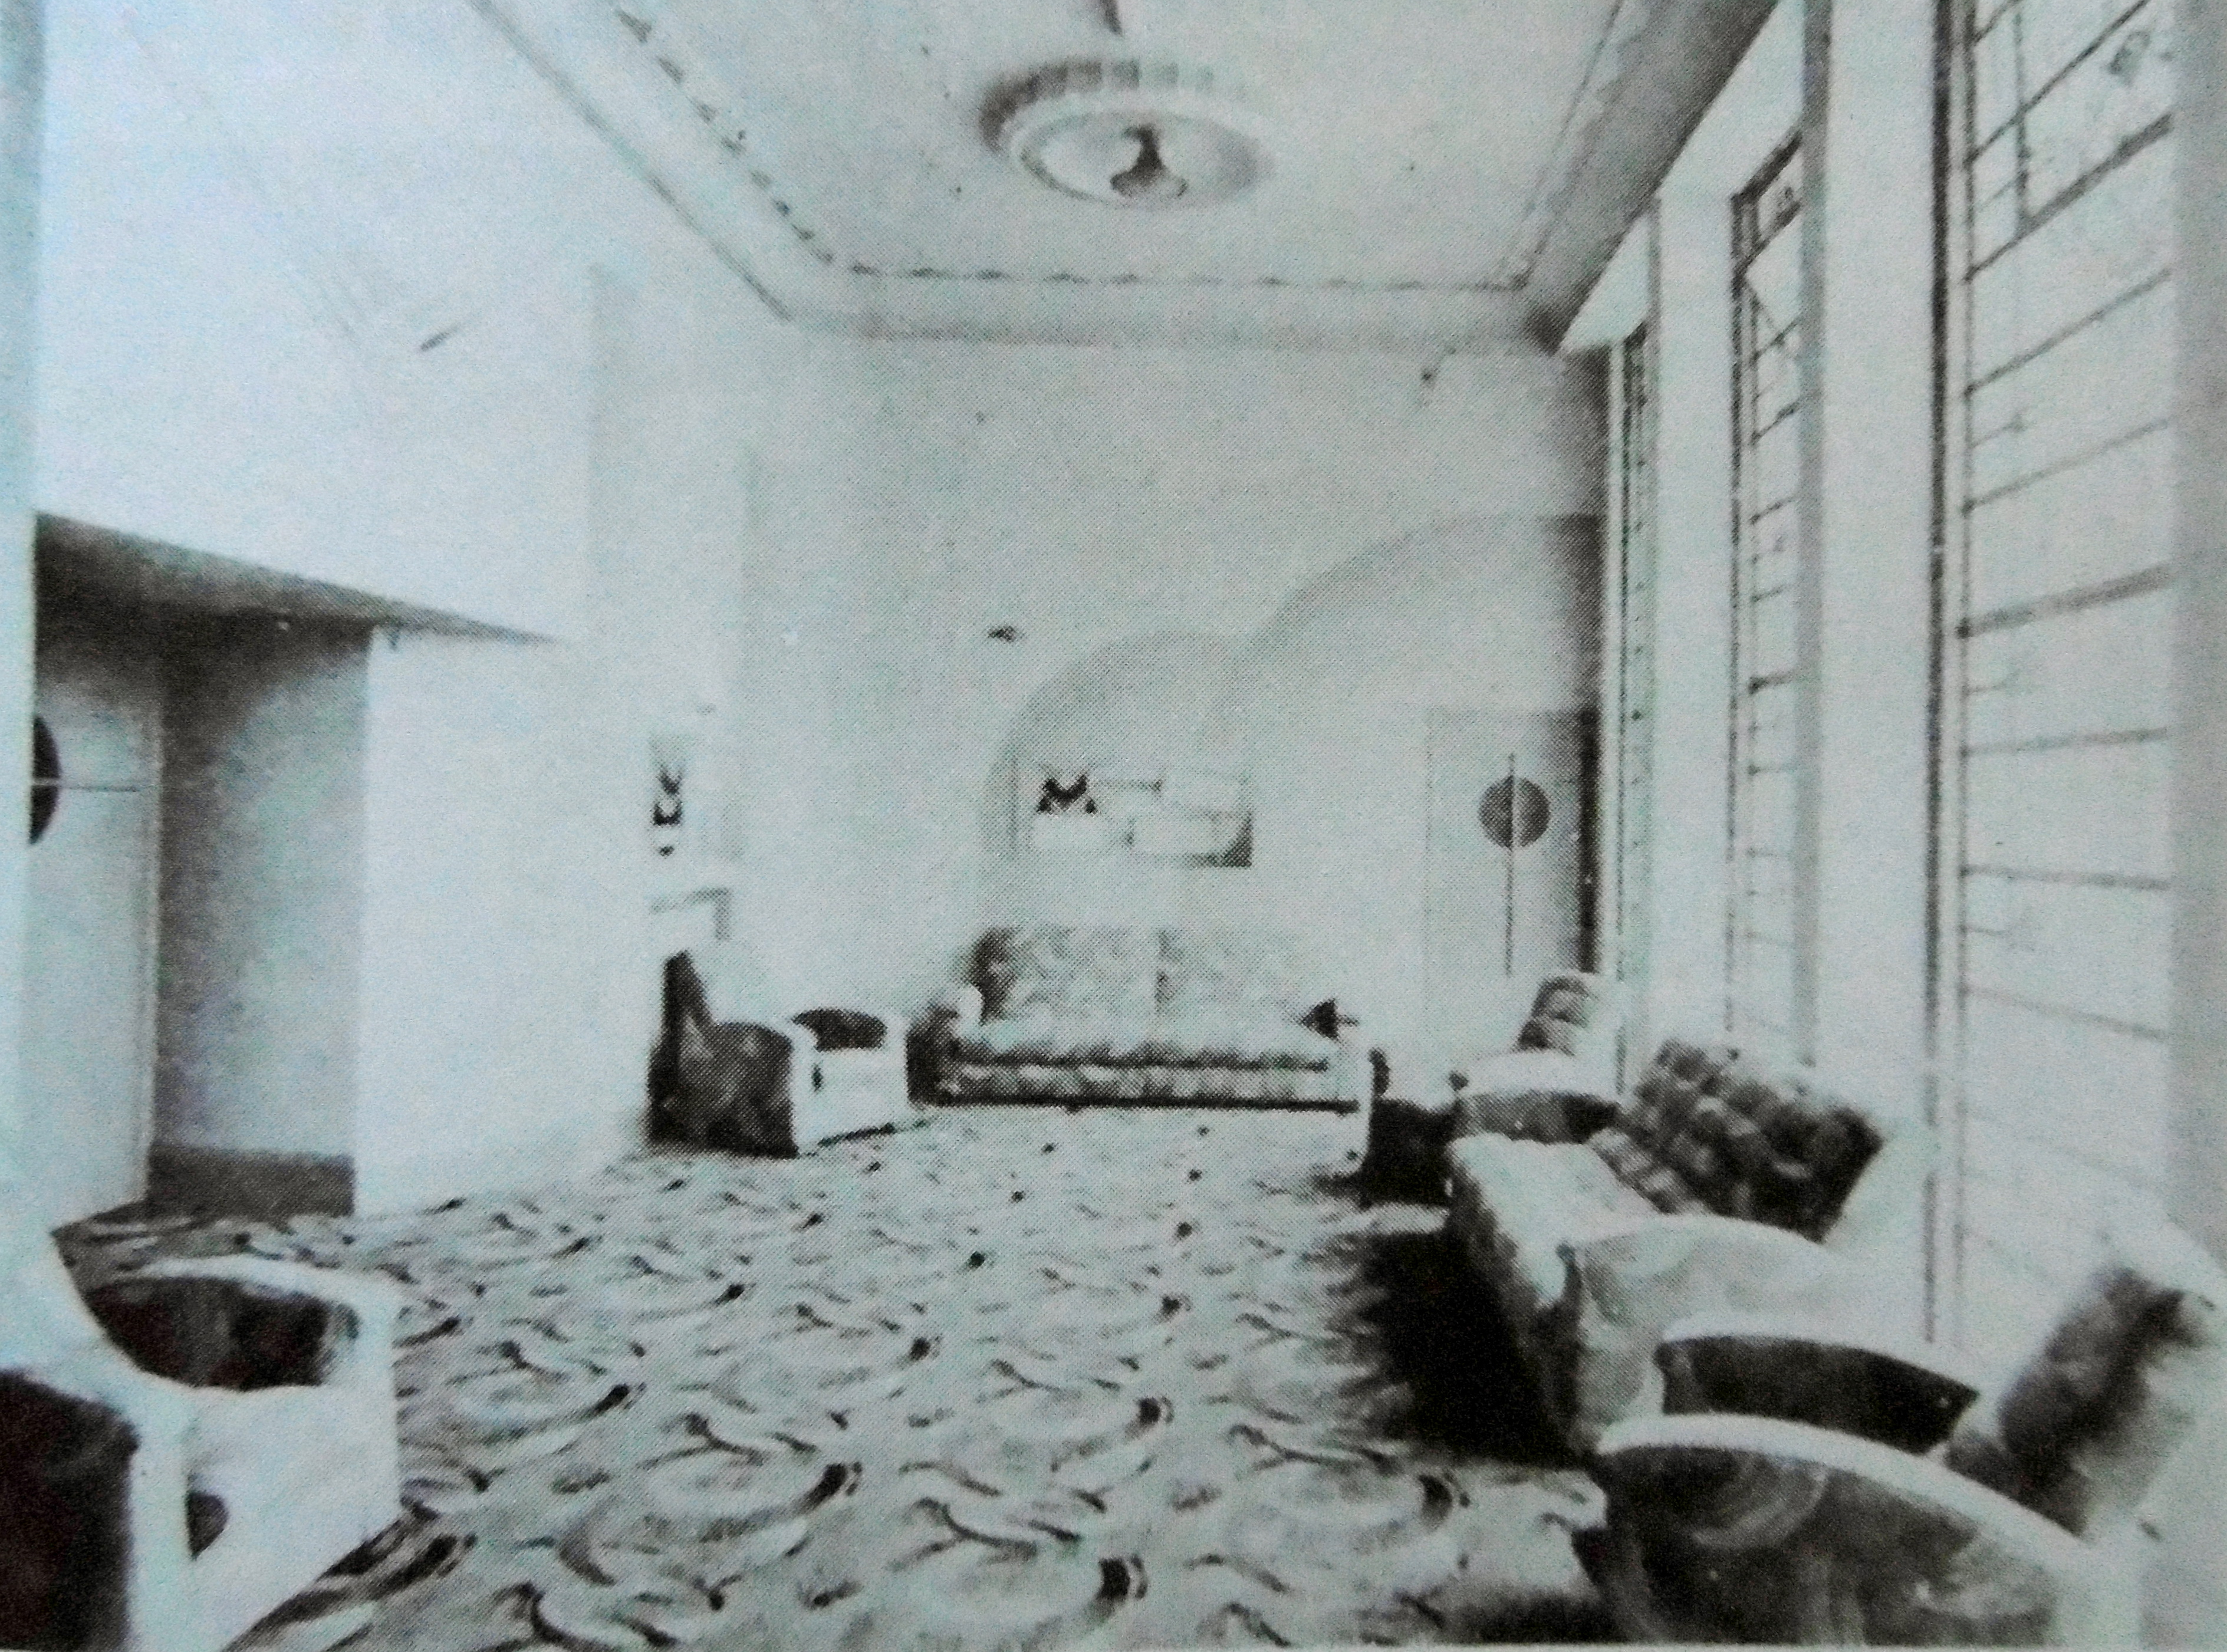 The tea lounge of The Avion, as featured in the souvenir opening in 1938. As reproduced in "Aldridge in Old Photographs," by Jan Farrow.